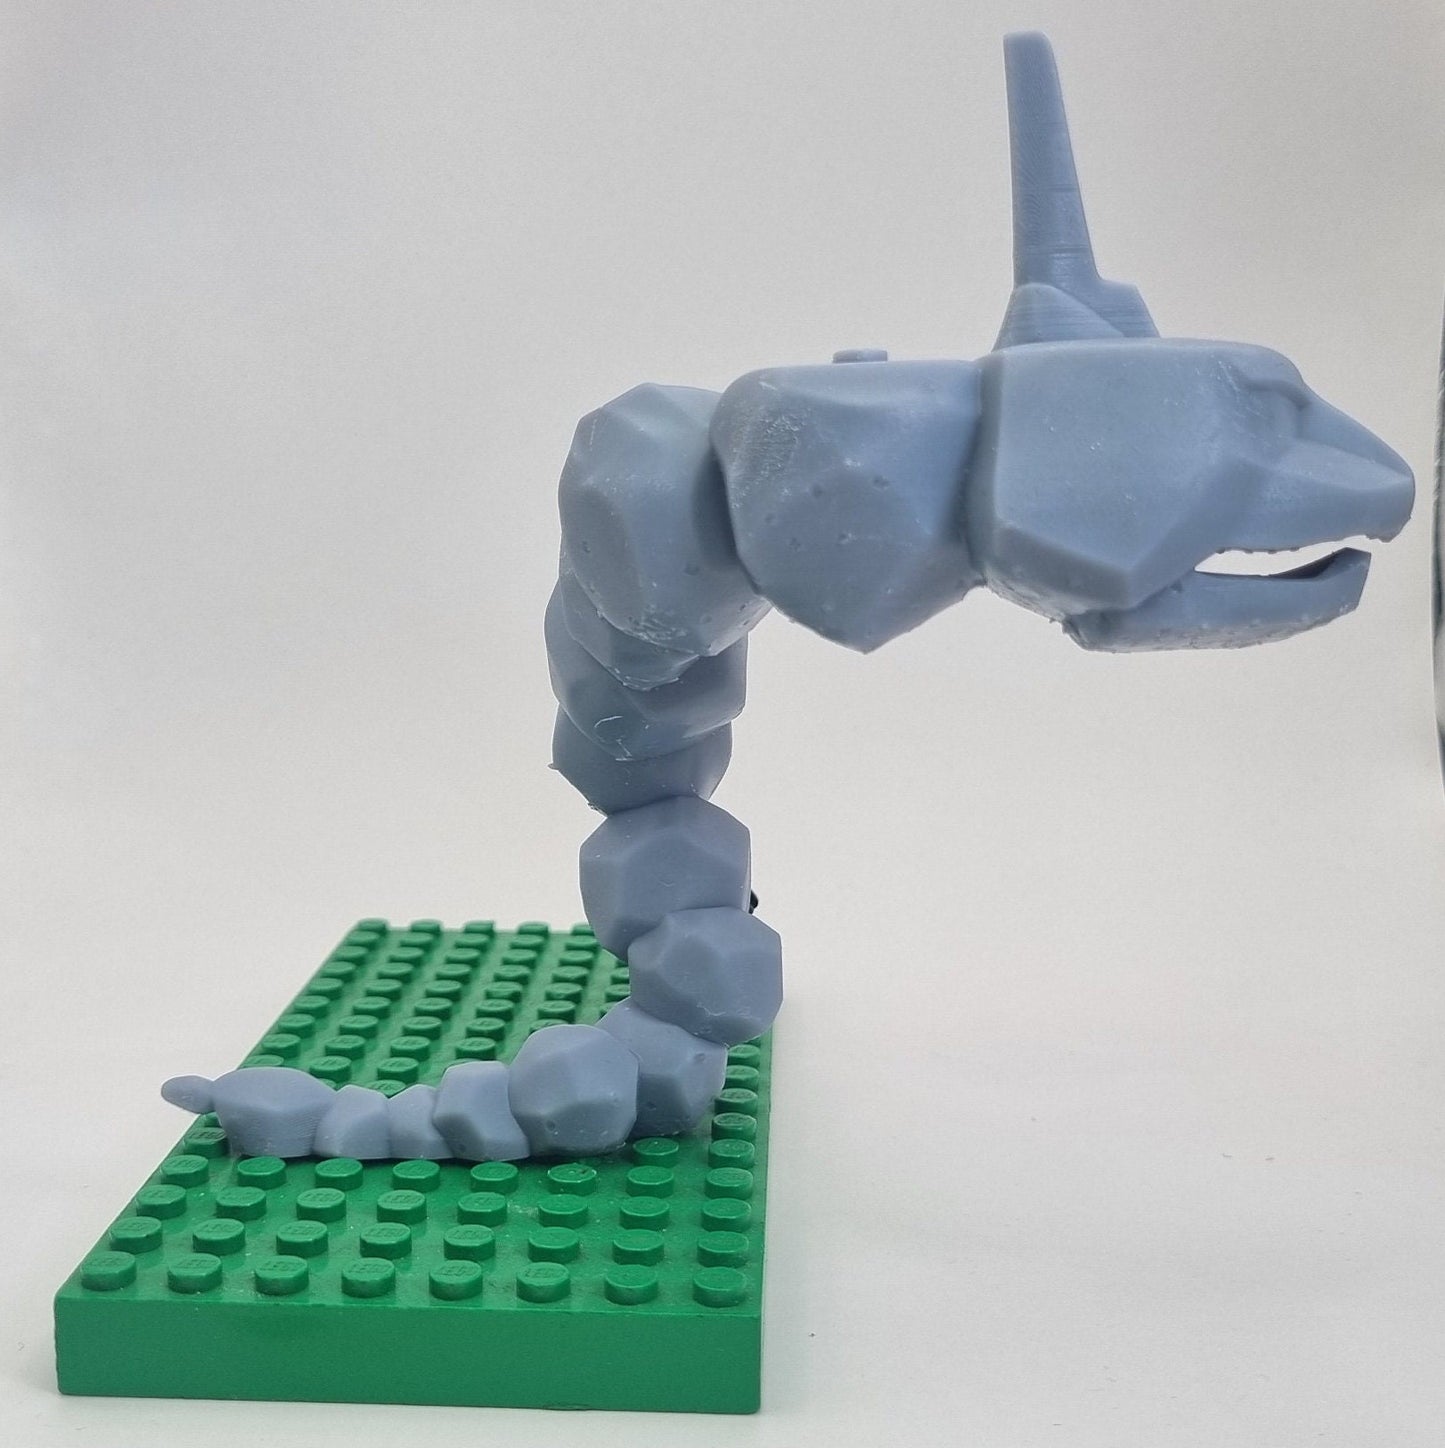 Custom 3D printed building toy animal to catch together clamped rocks!